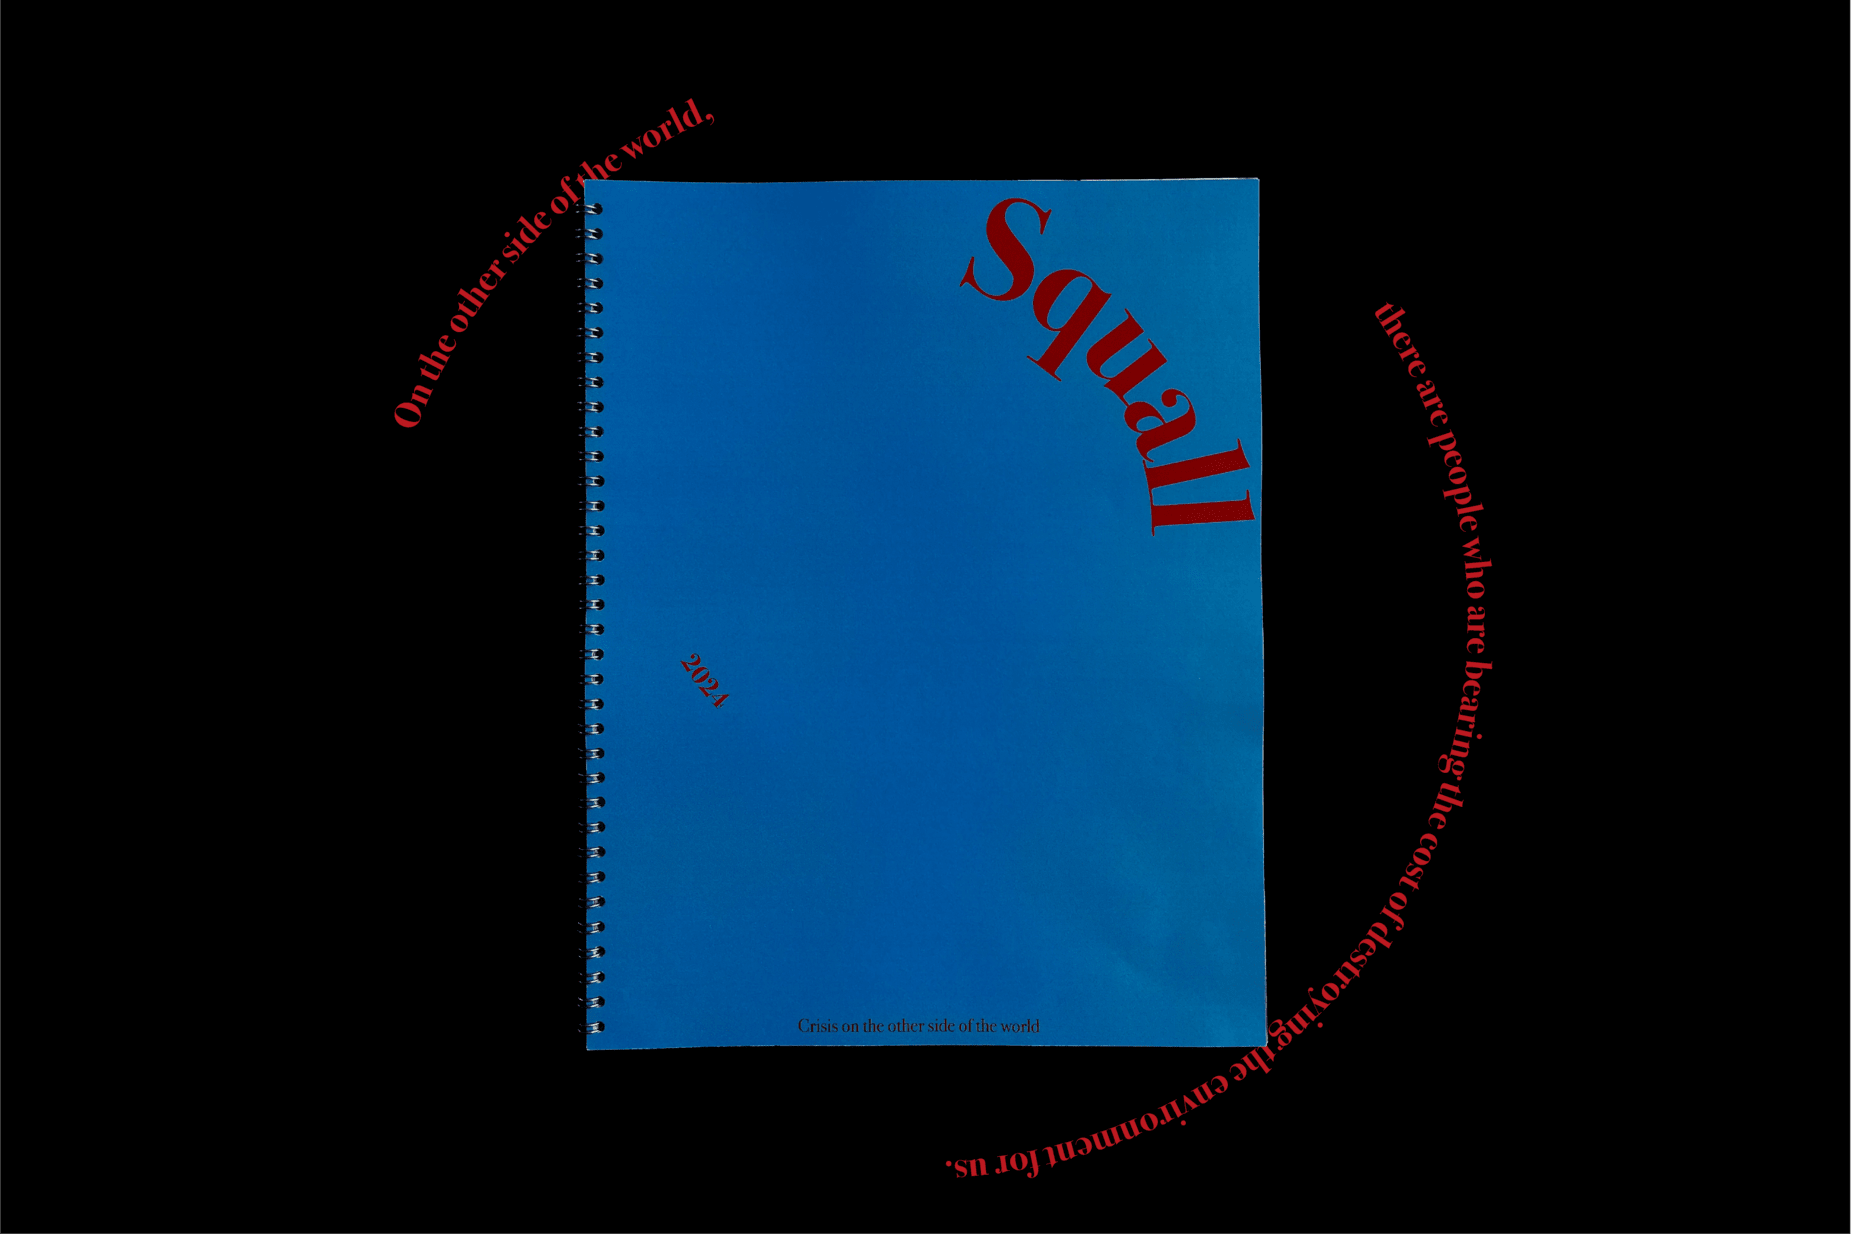 Magazine with blue cover on black background, titled Squall